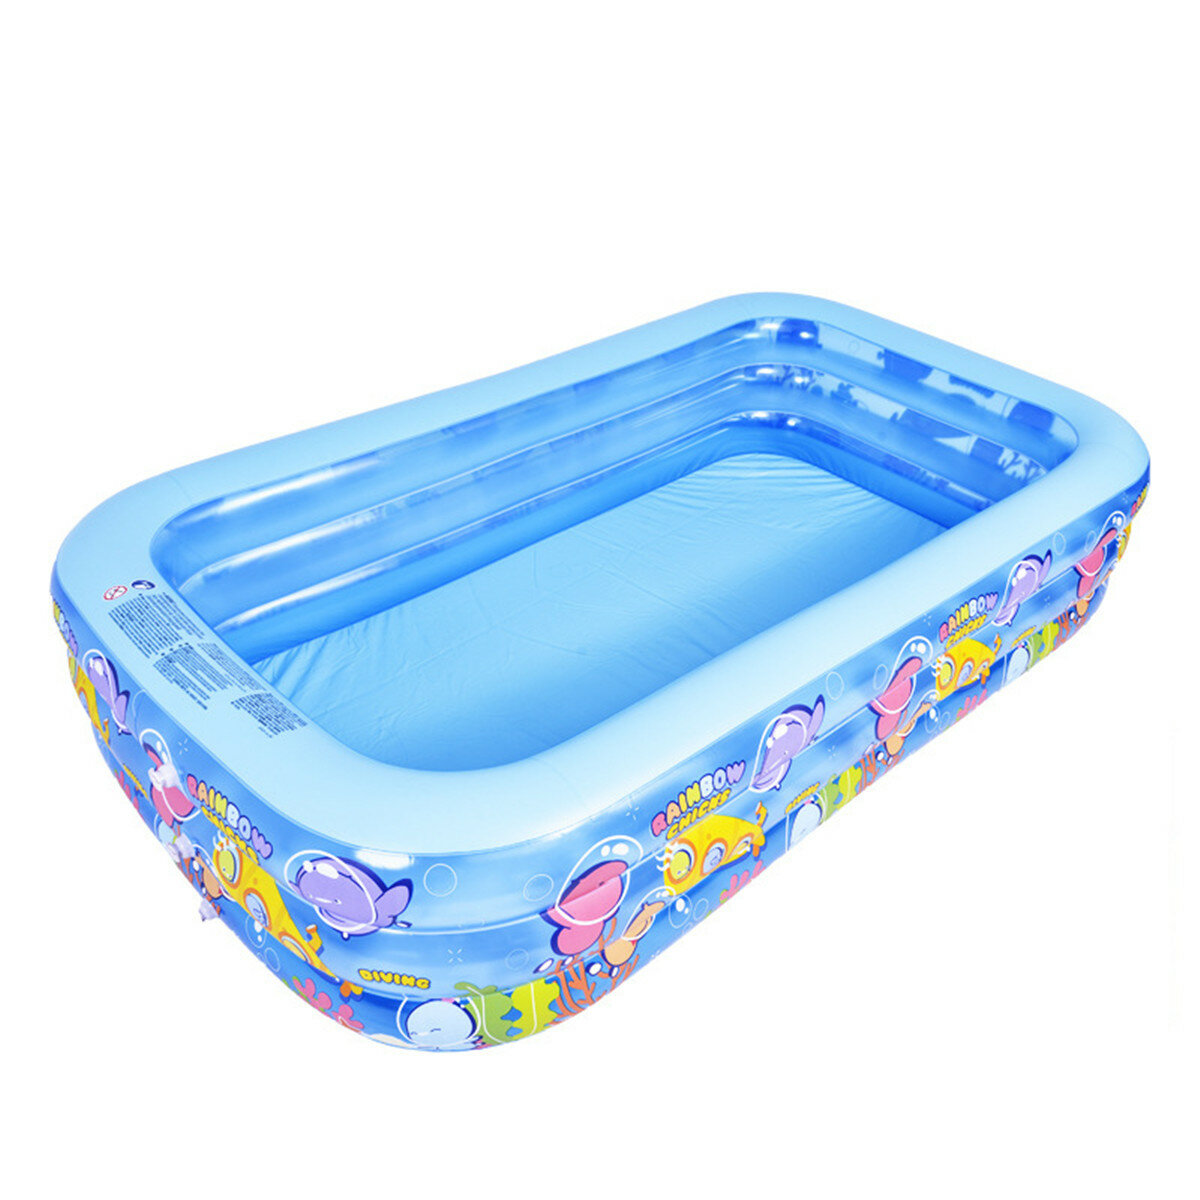 JILONG Inflatable Swimming Pool High Quality Outdoor Home Use Paddling Pool Kids Adults Large Size Inflatable Pool